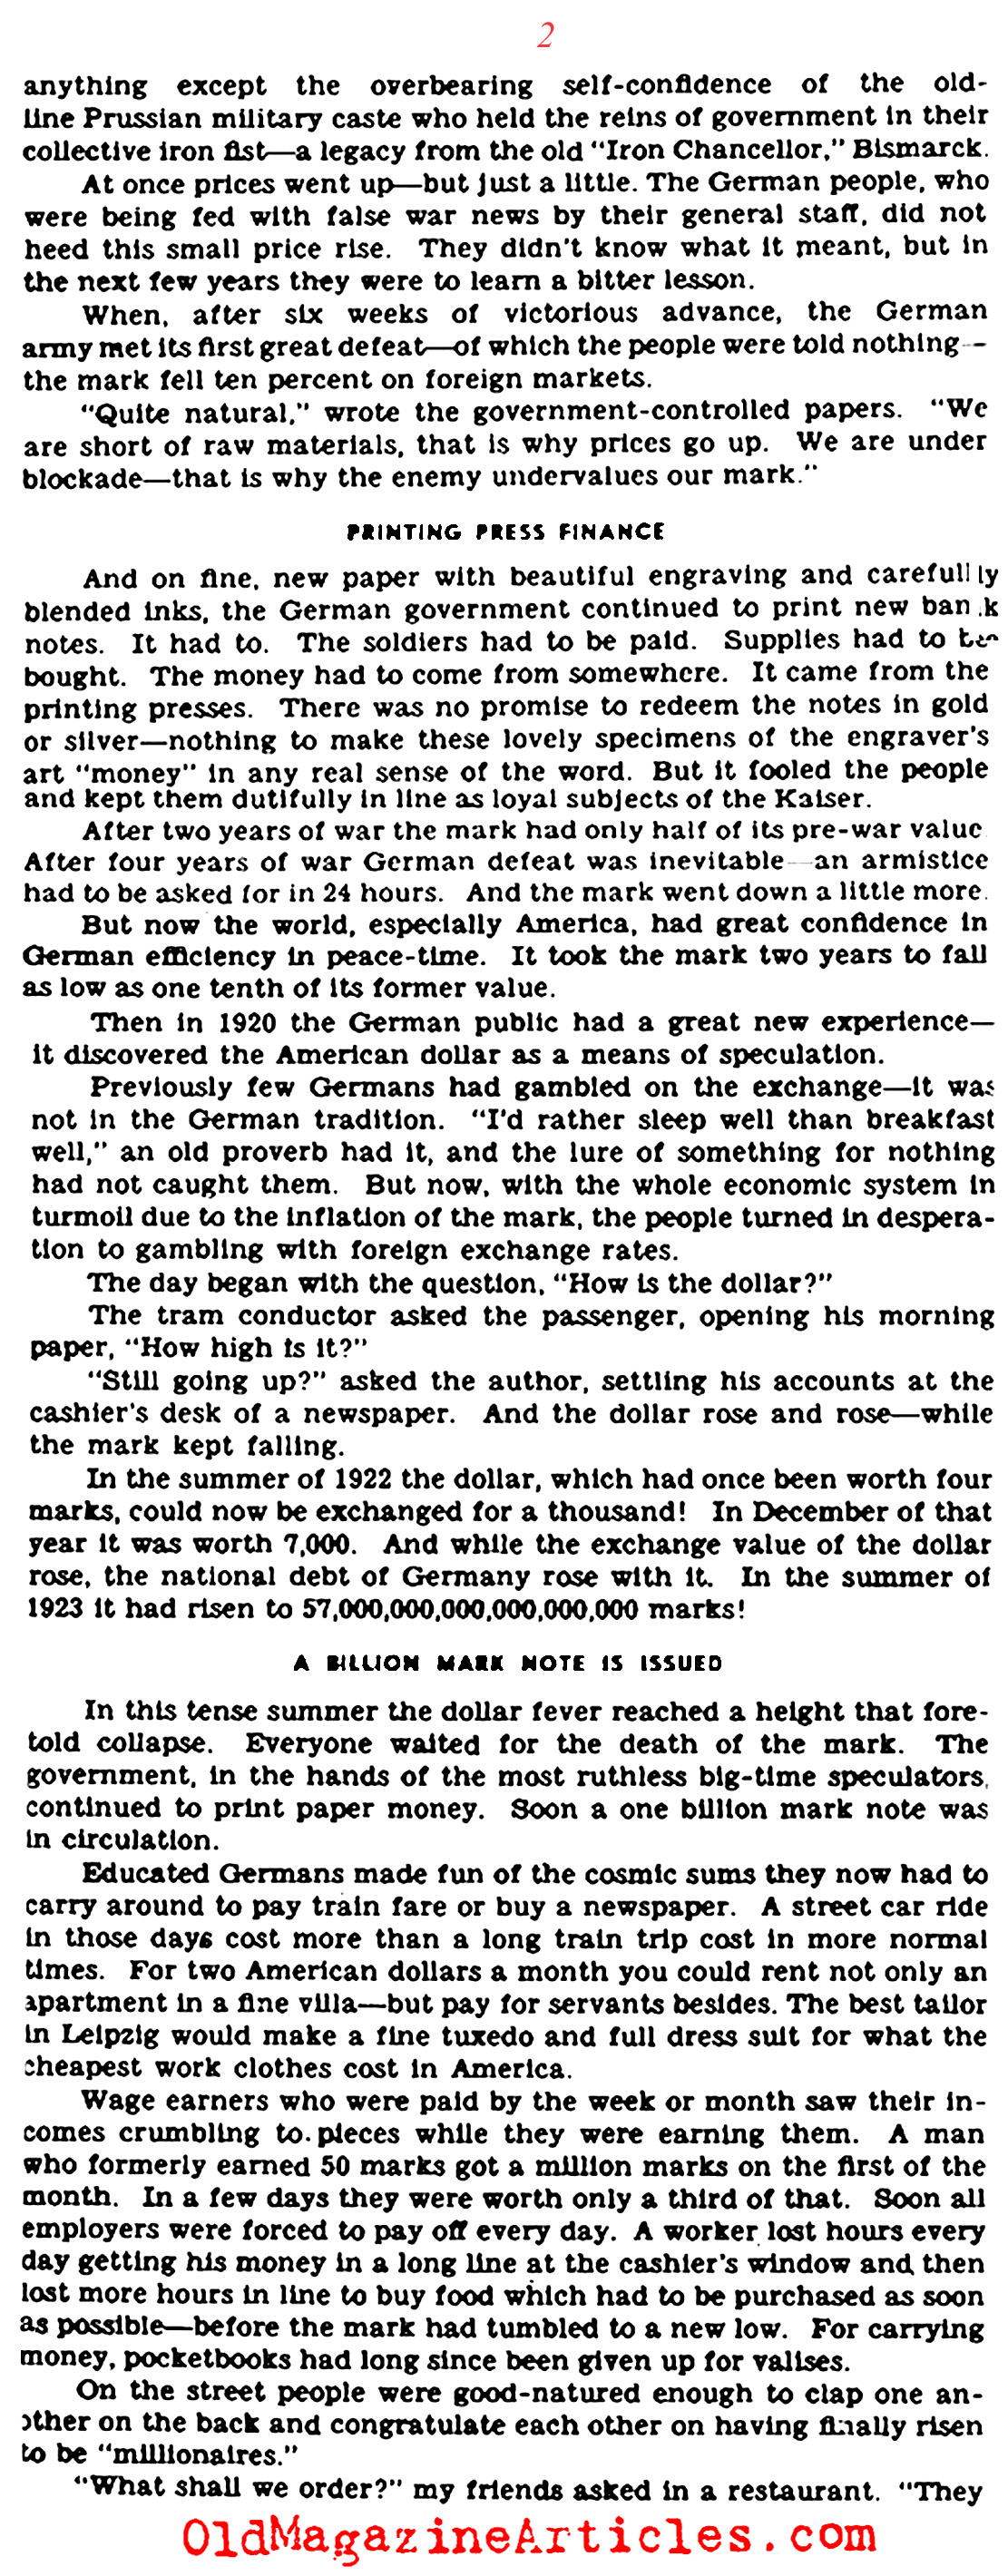 Rampant Inflation in Post-War Germany (Click Magazine, 1944)